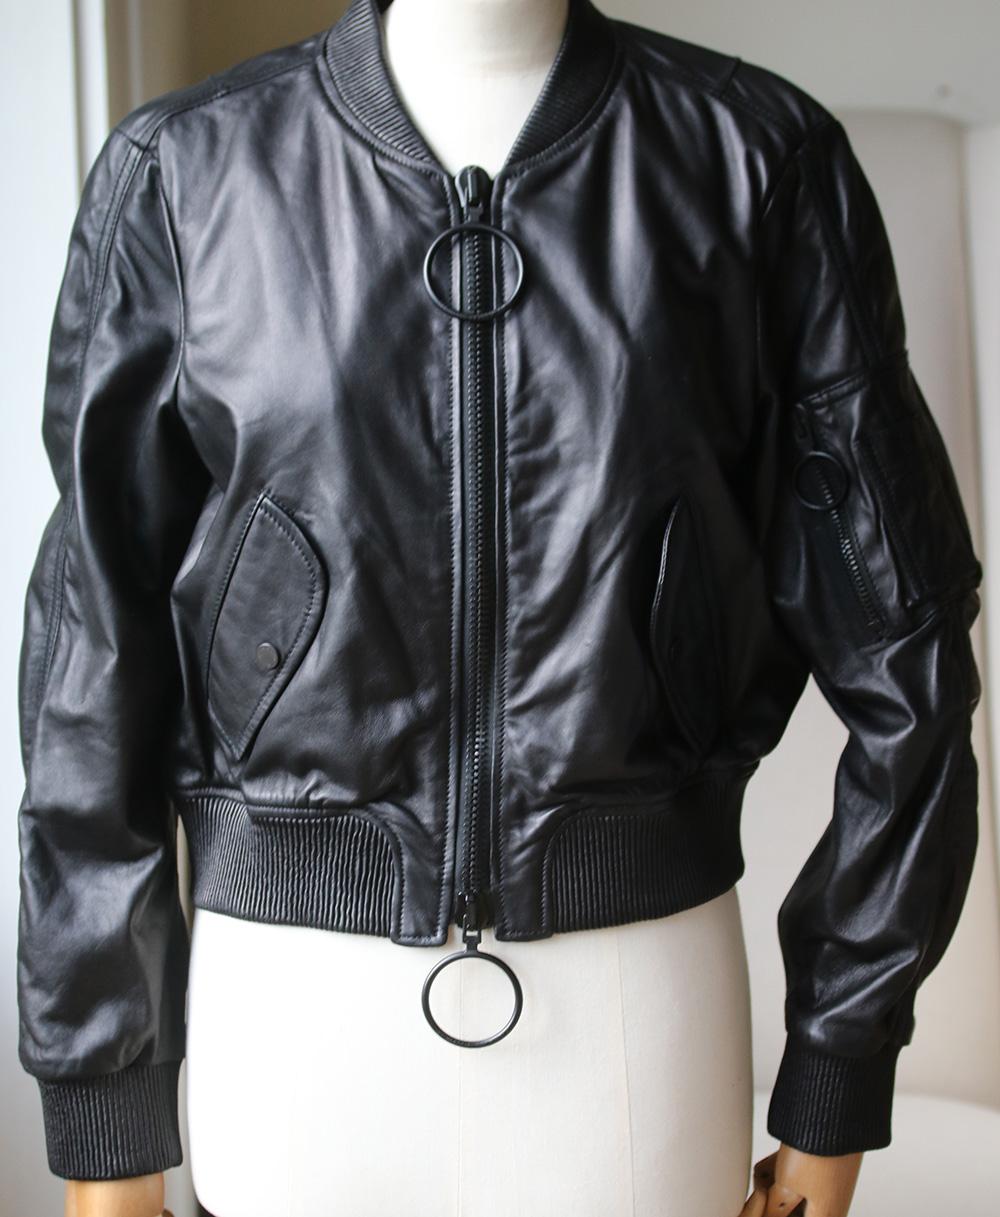 Channel modern urban cool in this leather bomber from Off-White. Crafted in Milan this black leather jacket stays contemporary and reflects the brand's off-beat aesthetic. It features a cropped style, a front zip fastening with signature large ring